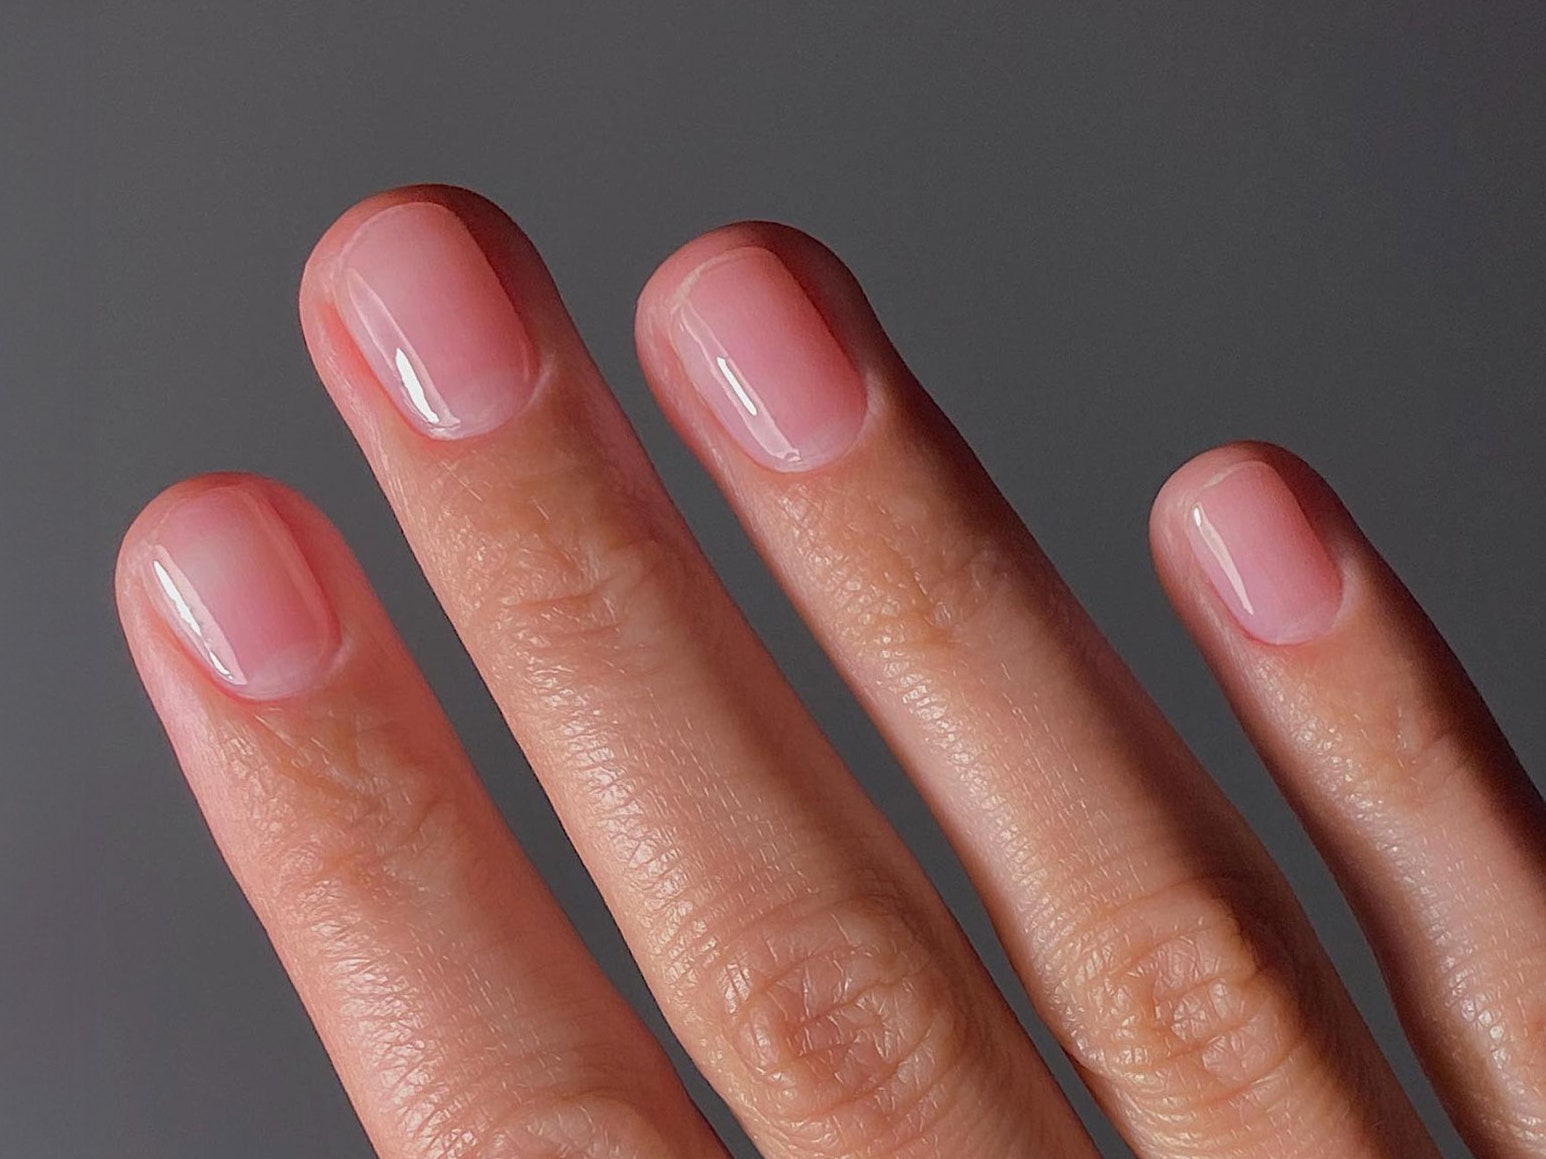 Soap nails are about to be everywhere